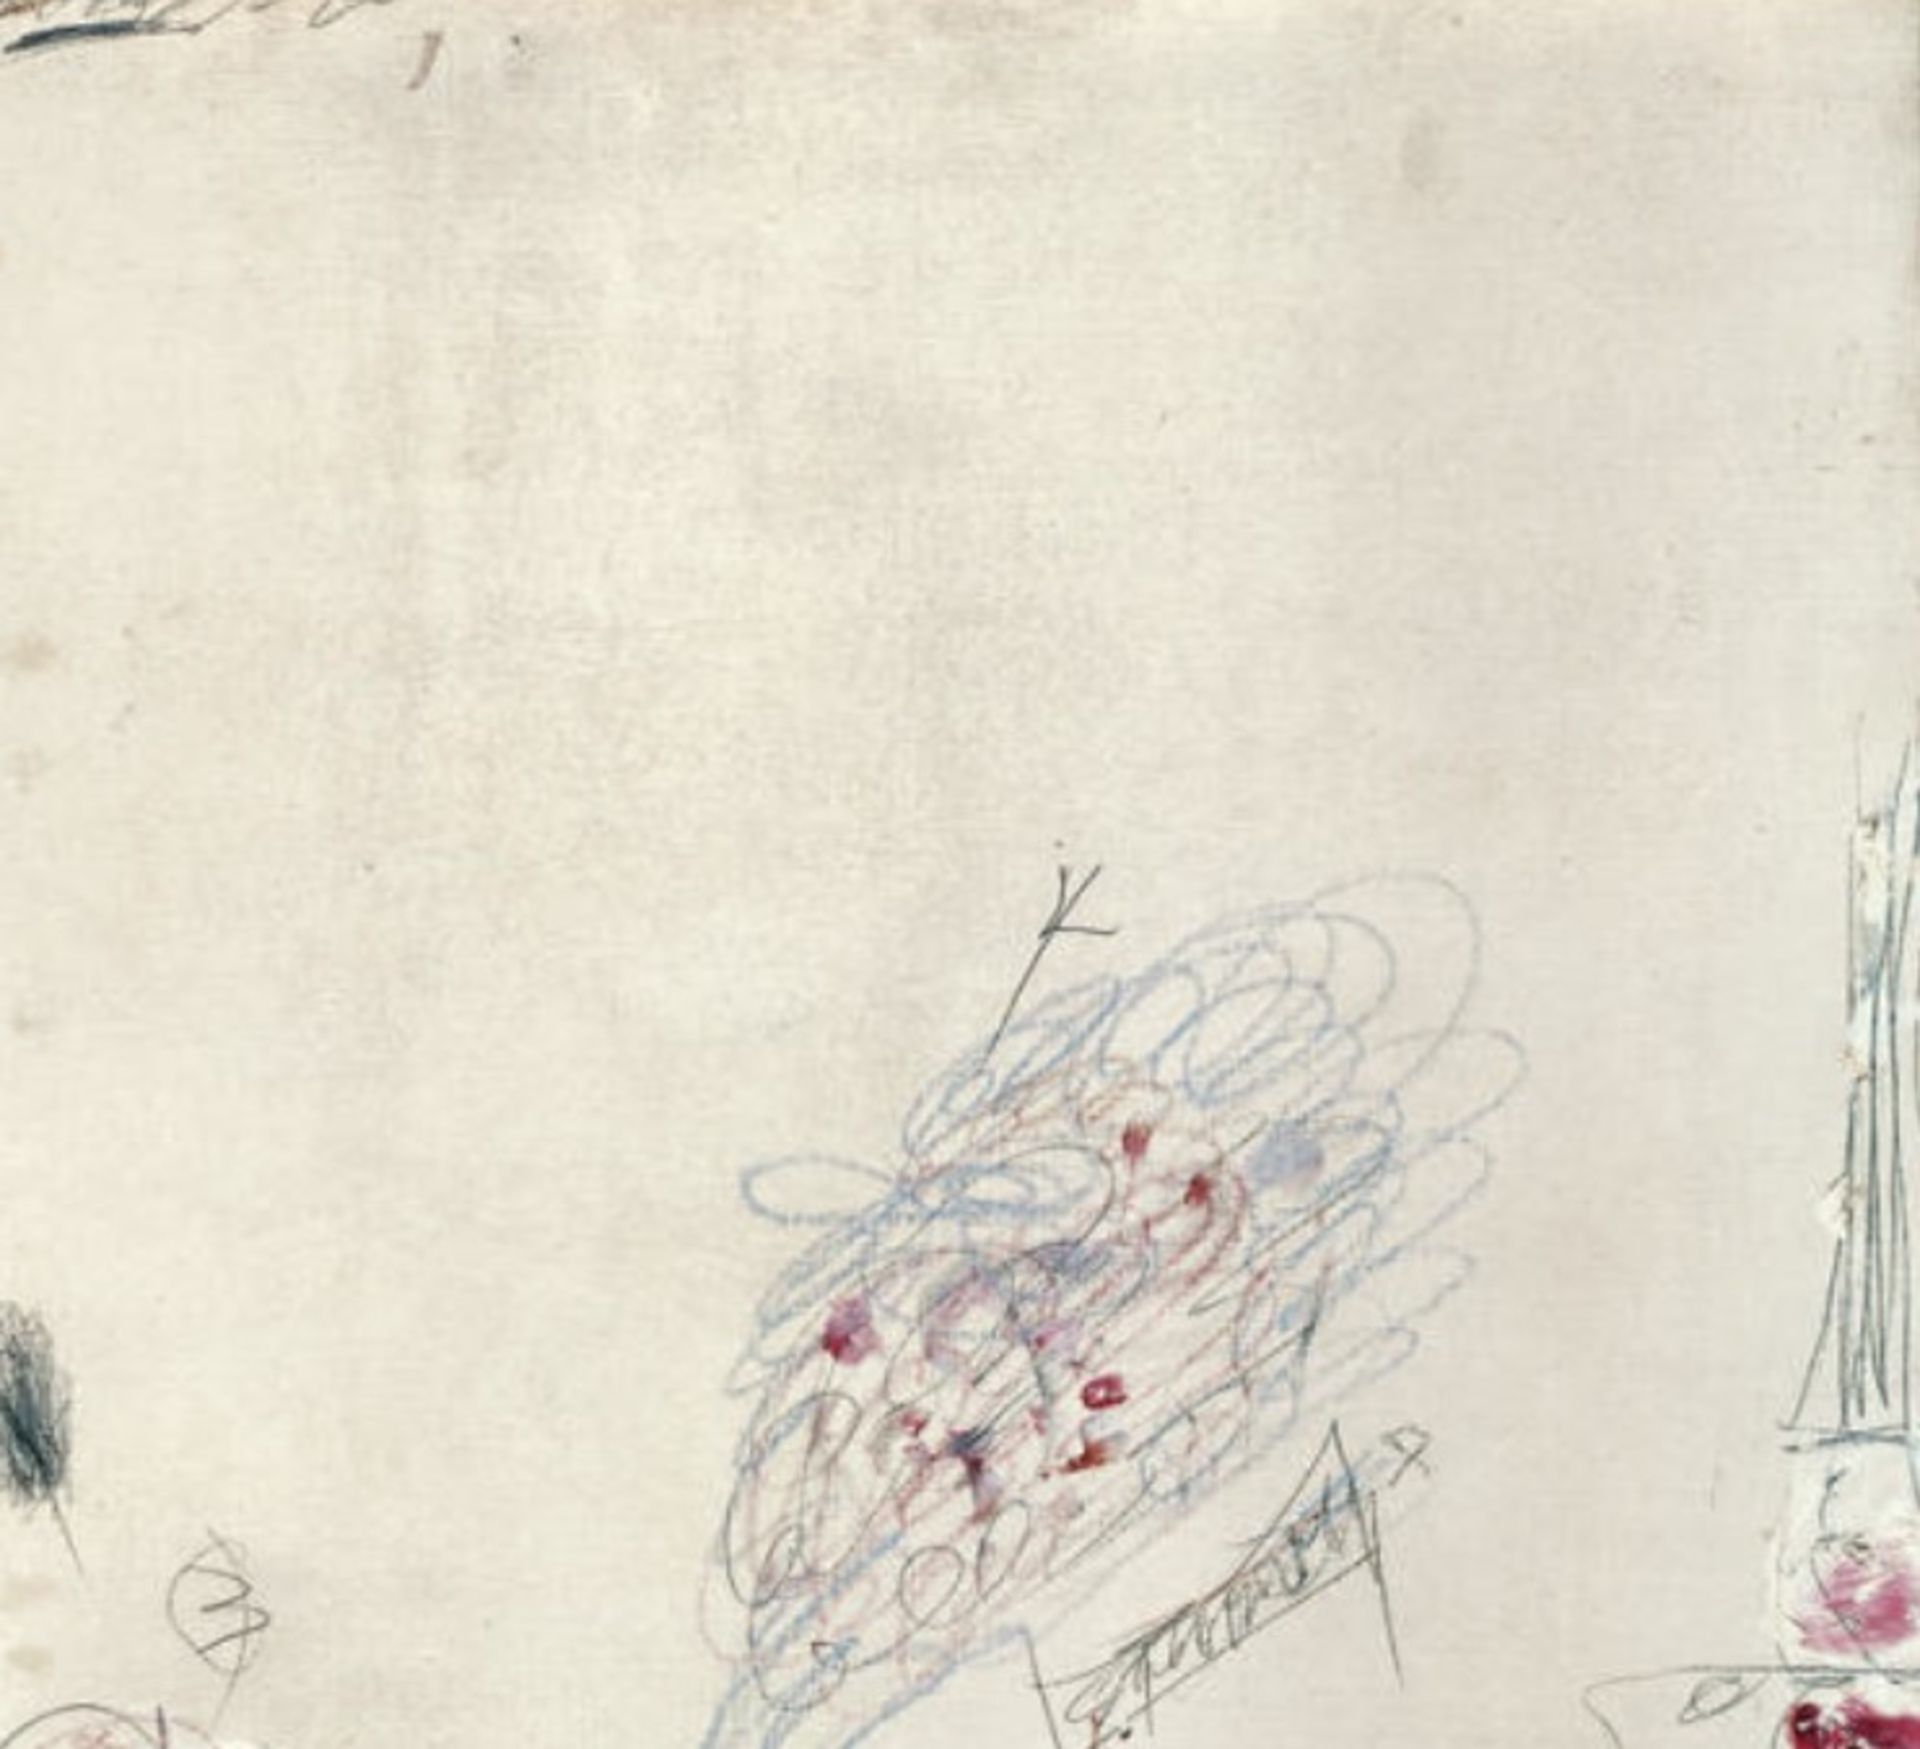 Cy Twombly "Second Voyage to Italy, 1962" Offset Lithograph - Image 4 of 5